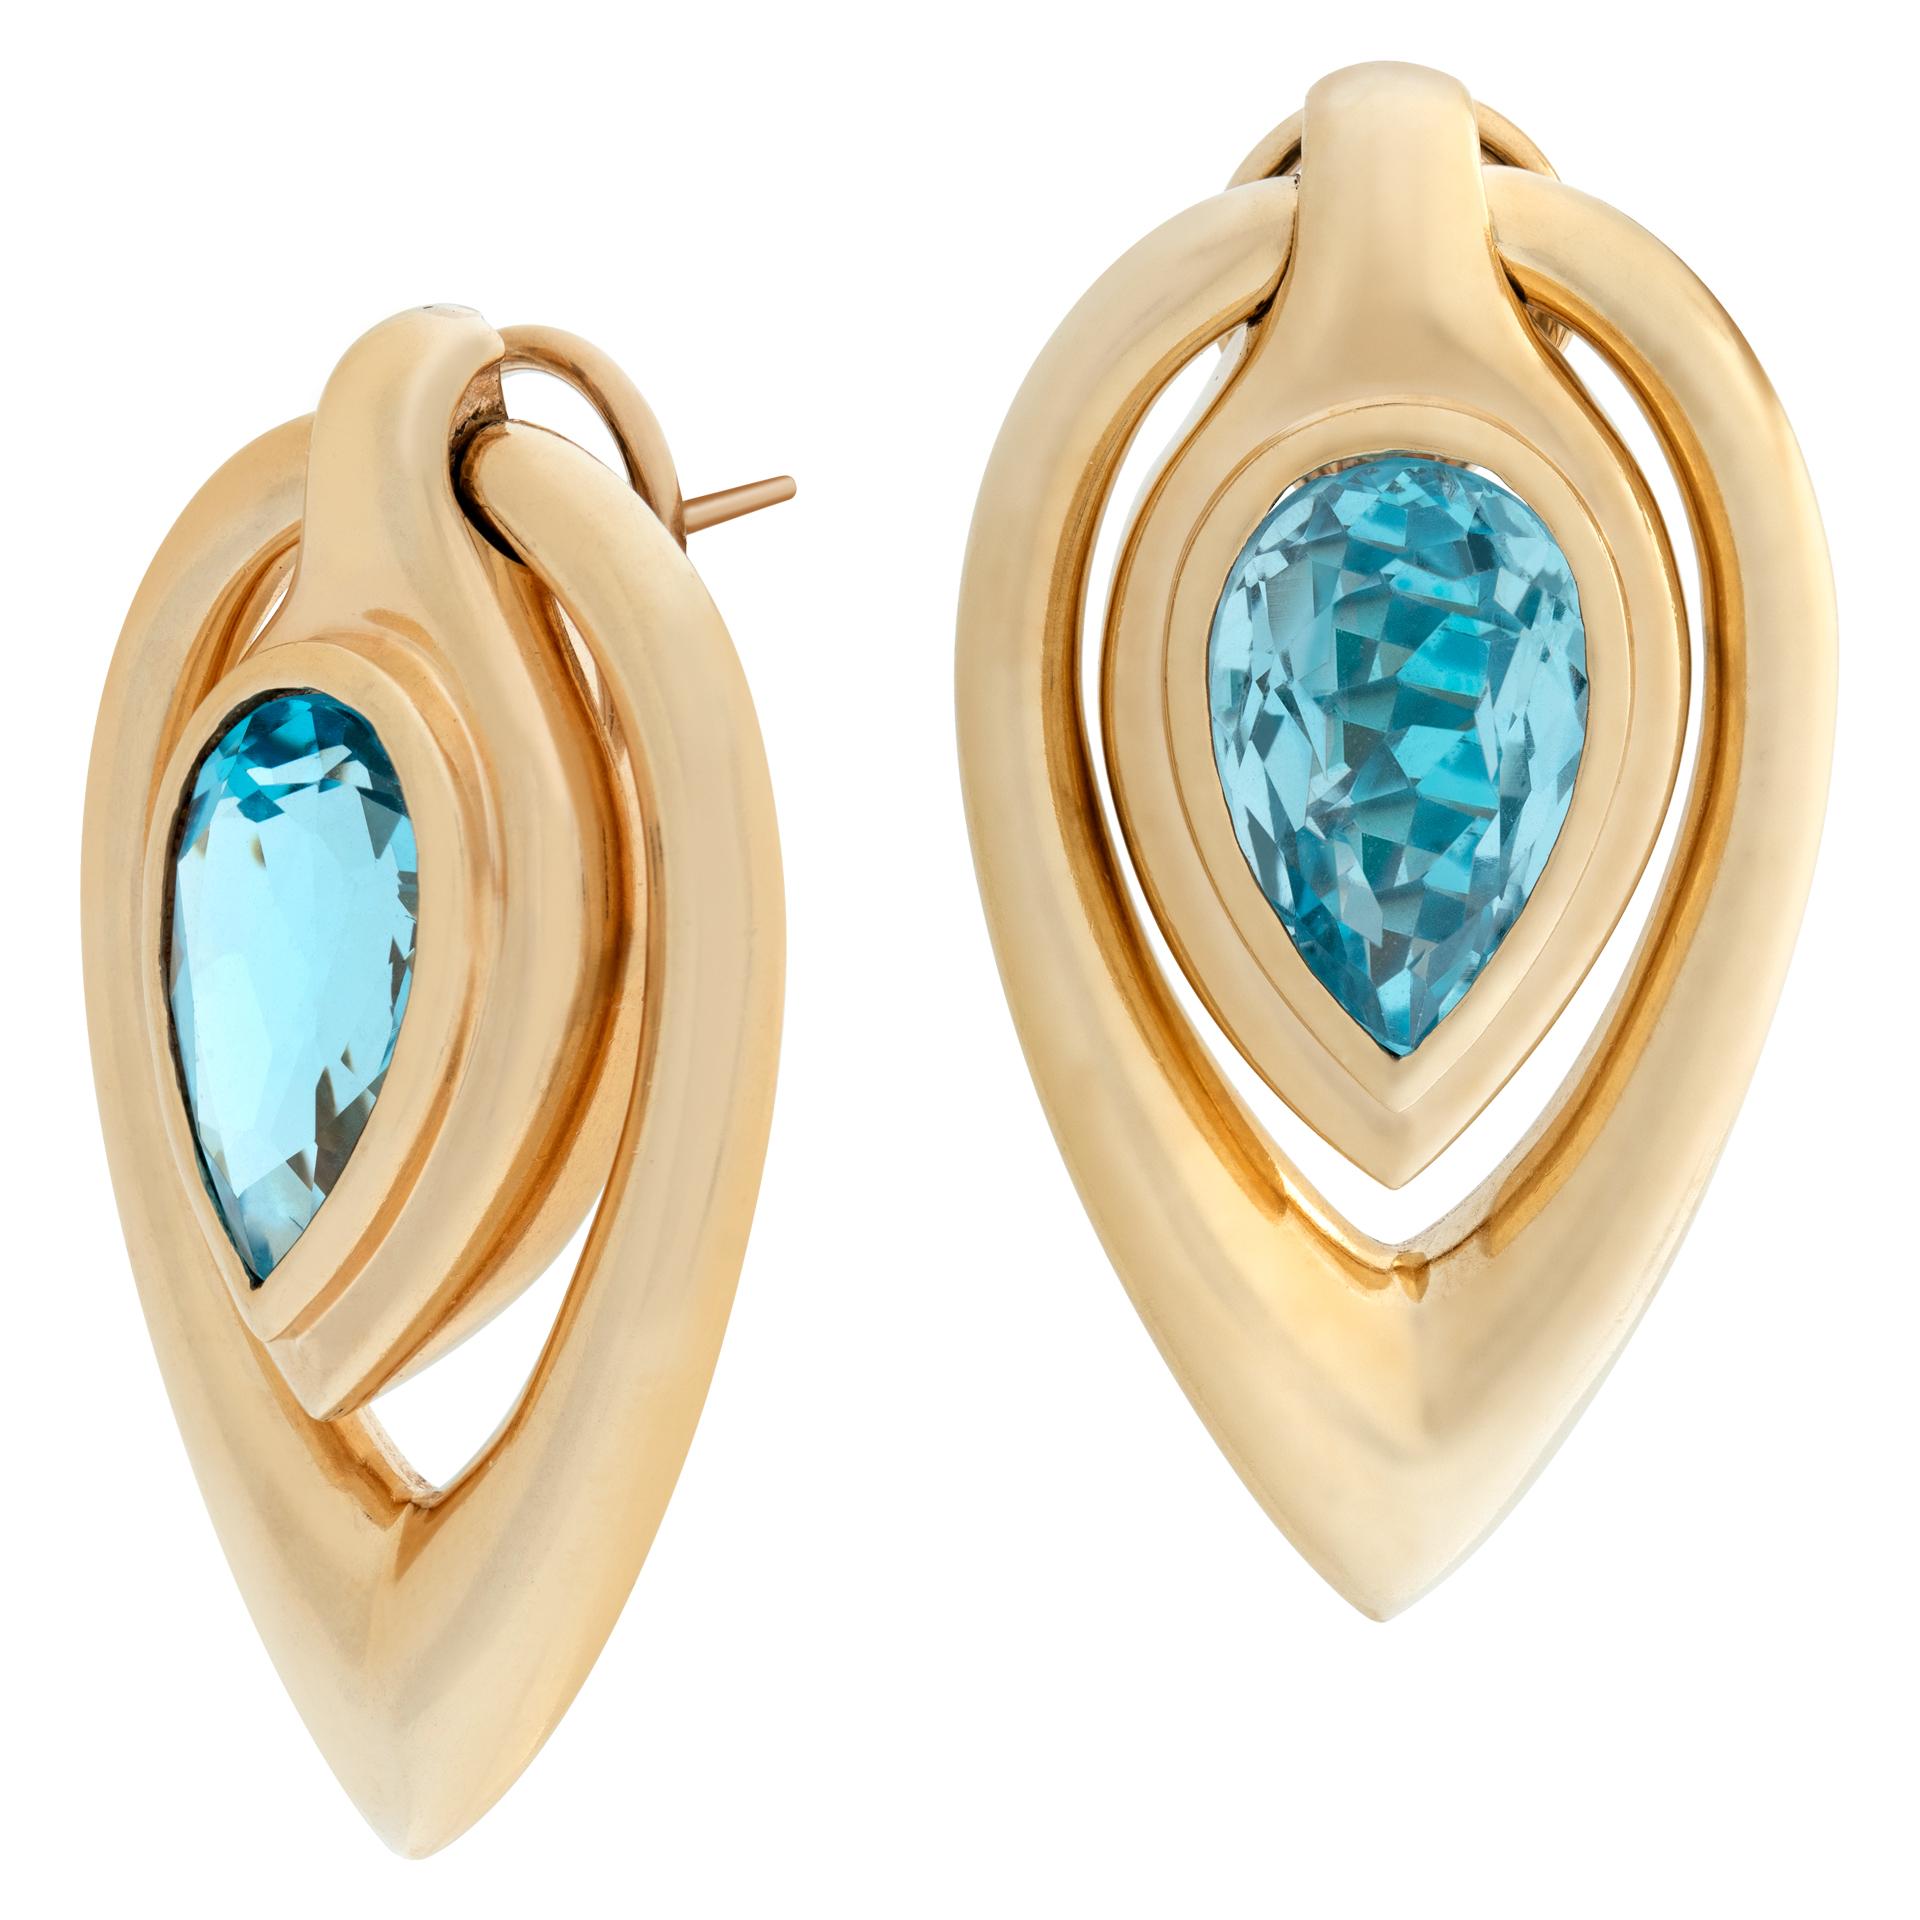 Tear drop blue topaz earrings moving with omega clips and posts in 14k yellow gold. Hanging legnth 38mm, width 20mm.